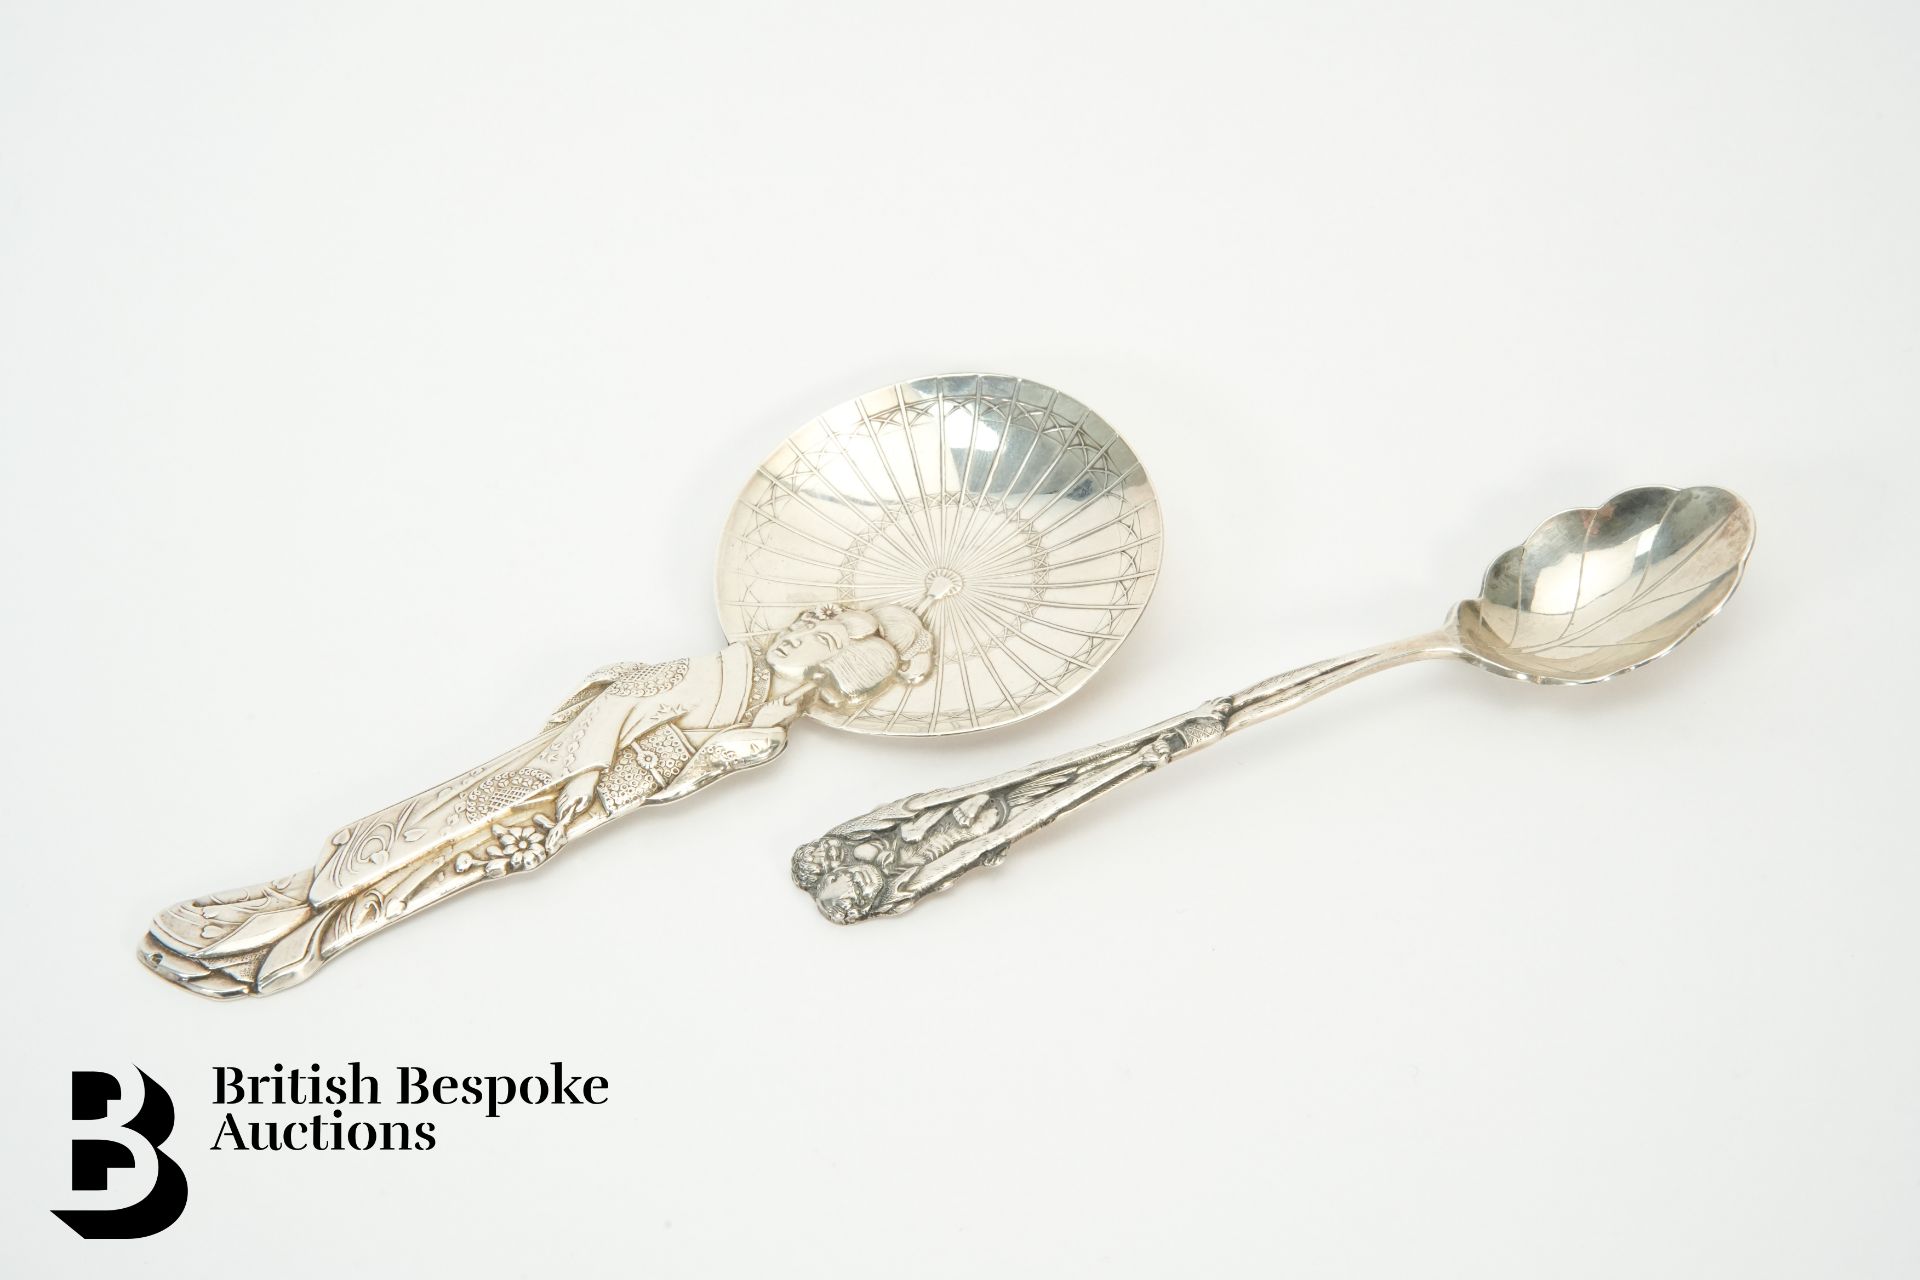 Japanese Silver Spoons